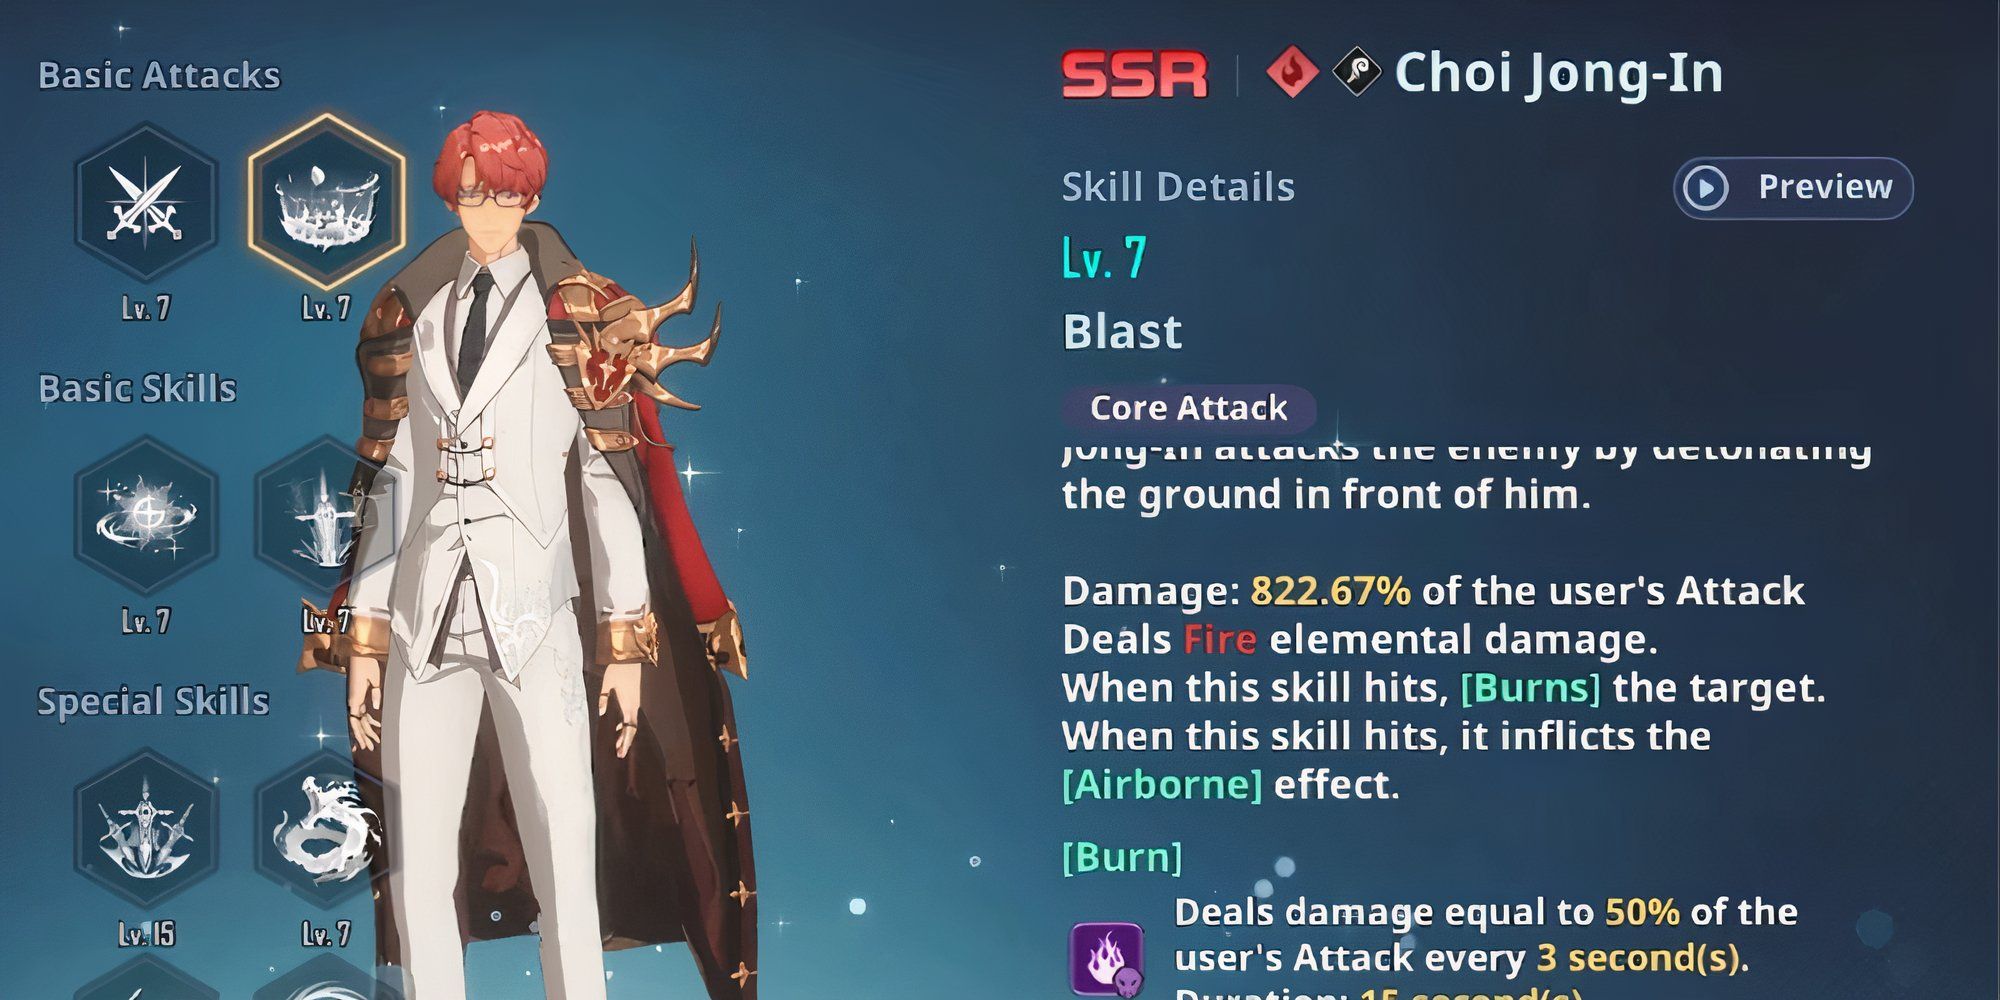 Choi Jong-In character showcase with his skill details